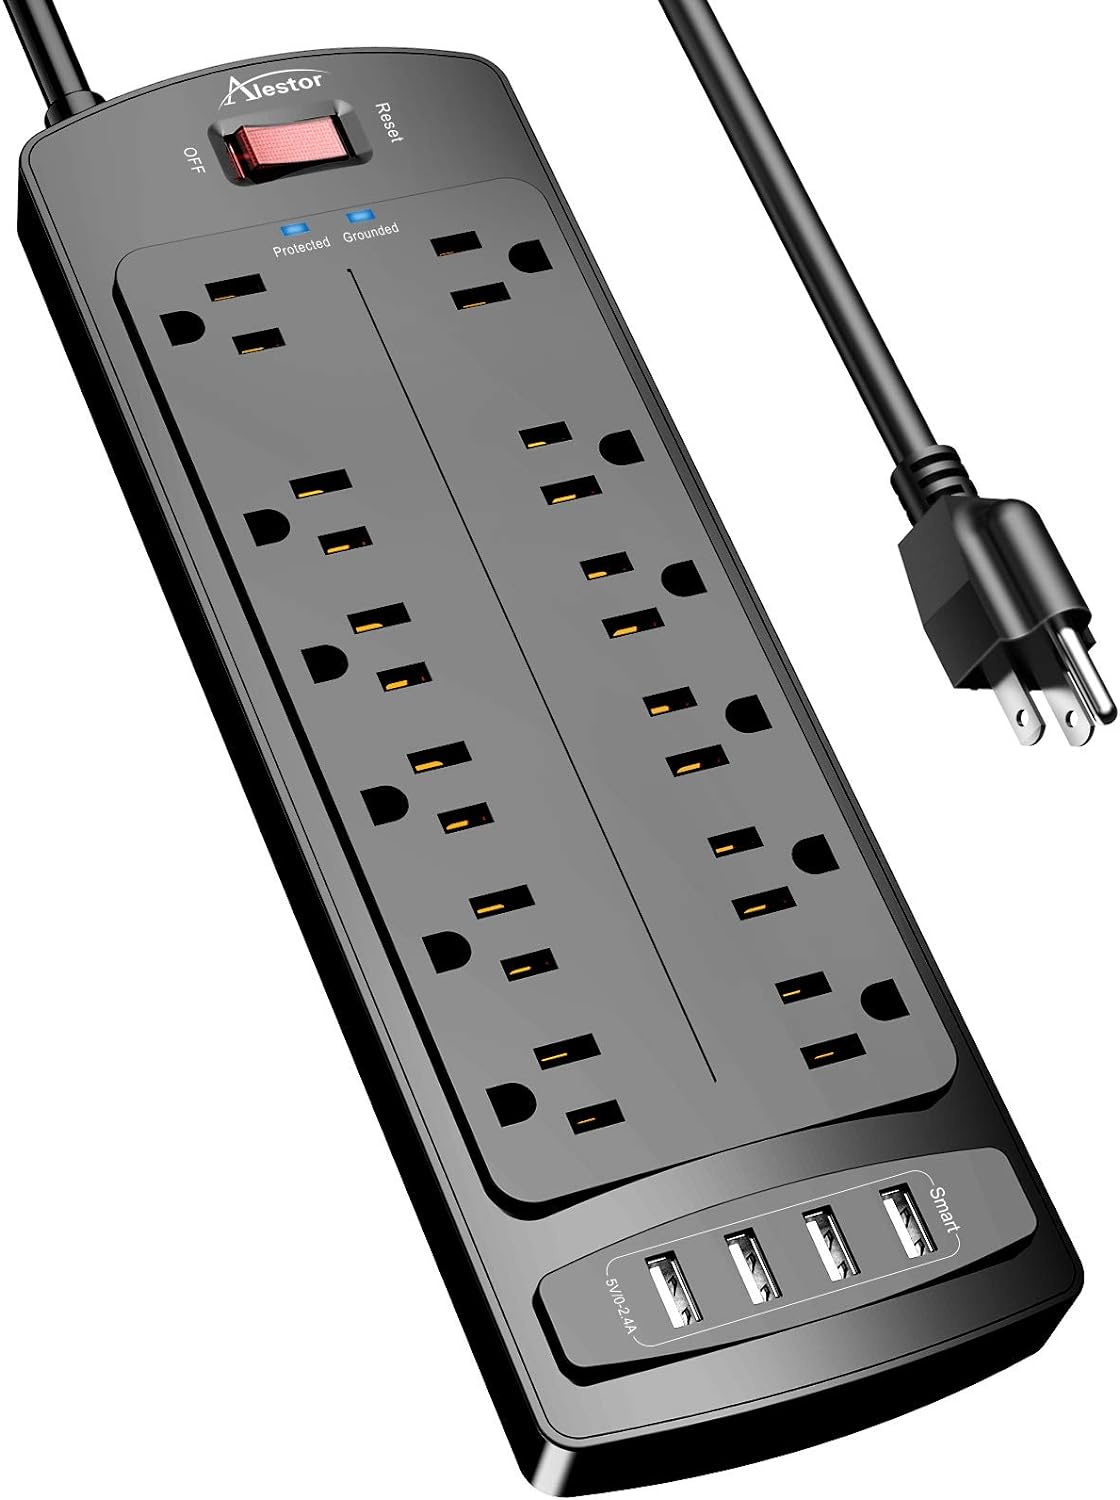 I have many of these power strips for my many computer work areas. Having a good regulated power supply is crucial to protect for your electronics long life! I live on Long Island where the lines are often hit by lightning, AND the power company is lax about line voltage regulation.Nice unit! This unit has a gas discharge tube [GDT] surge protector. [thats the best design]. The Powered usb outlets are great to power my usb bus hubs. Well built, plenty of outlets. A longer power cord would have